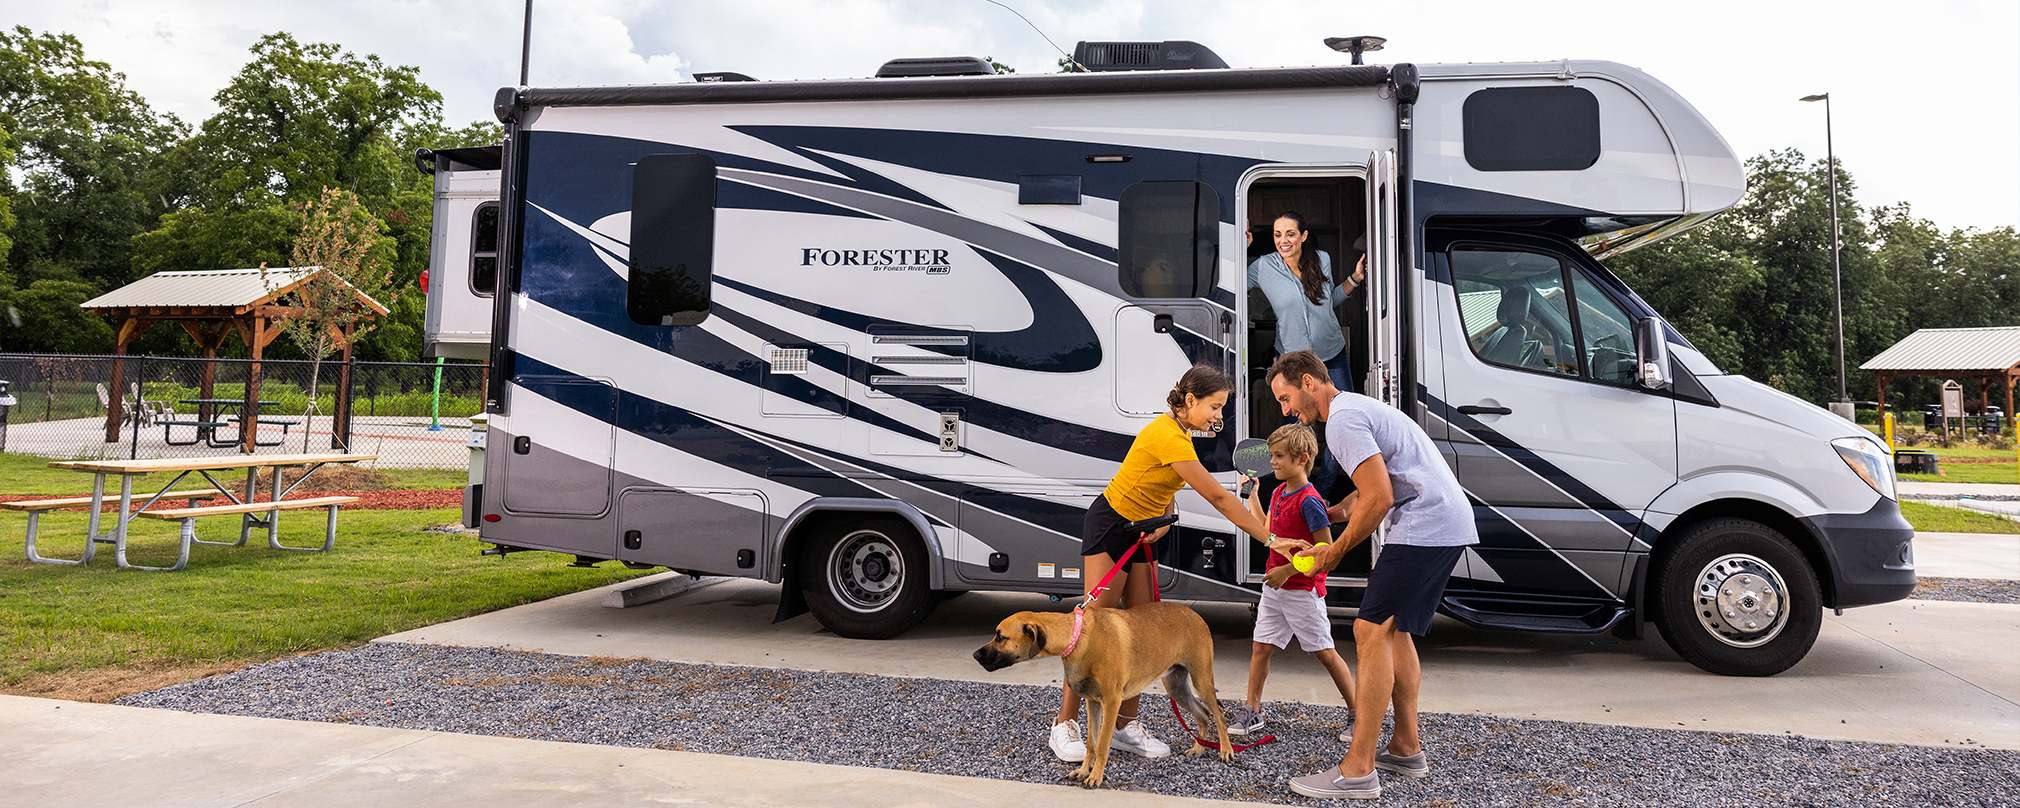 love's travel stops with rv hookups